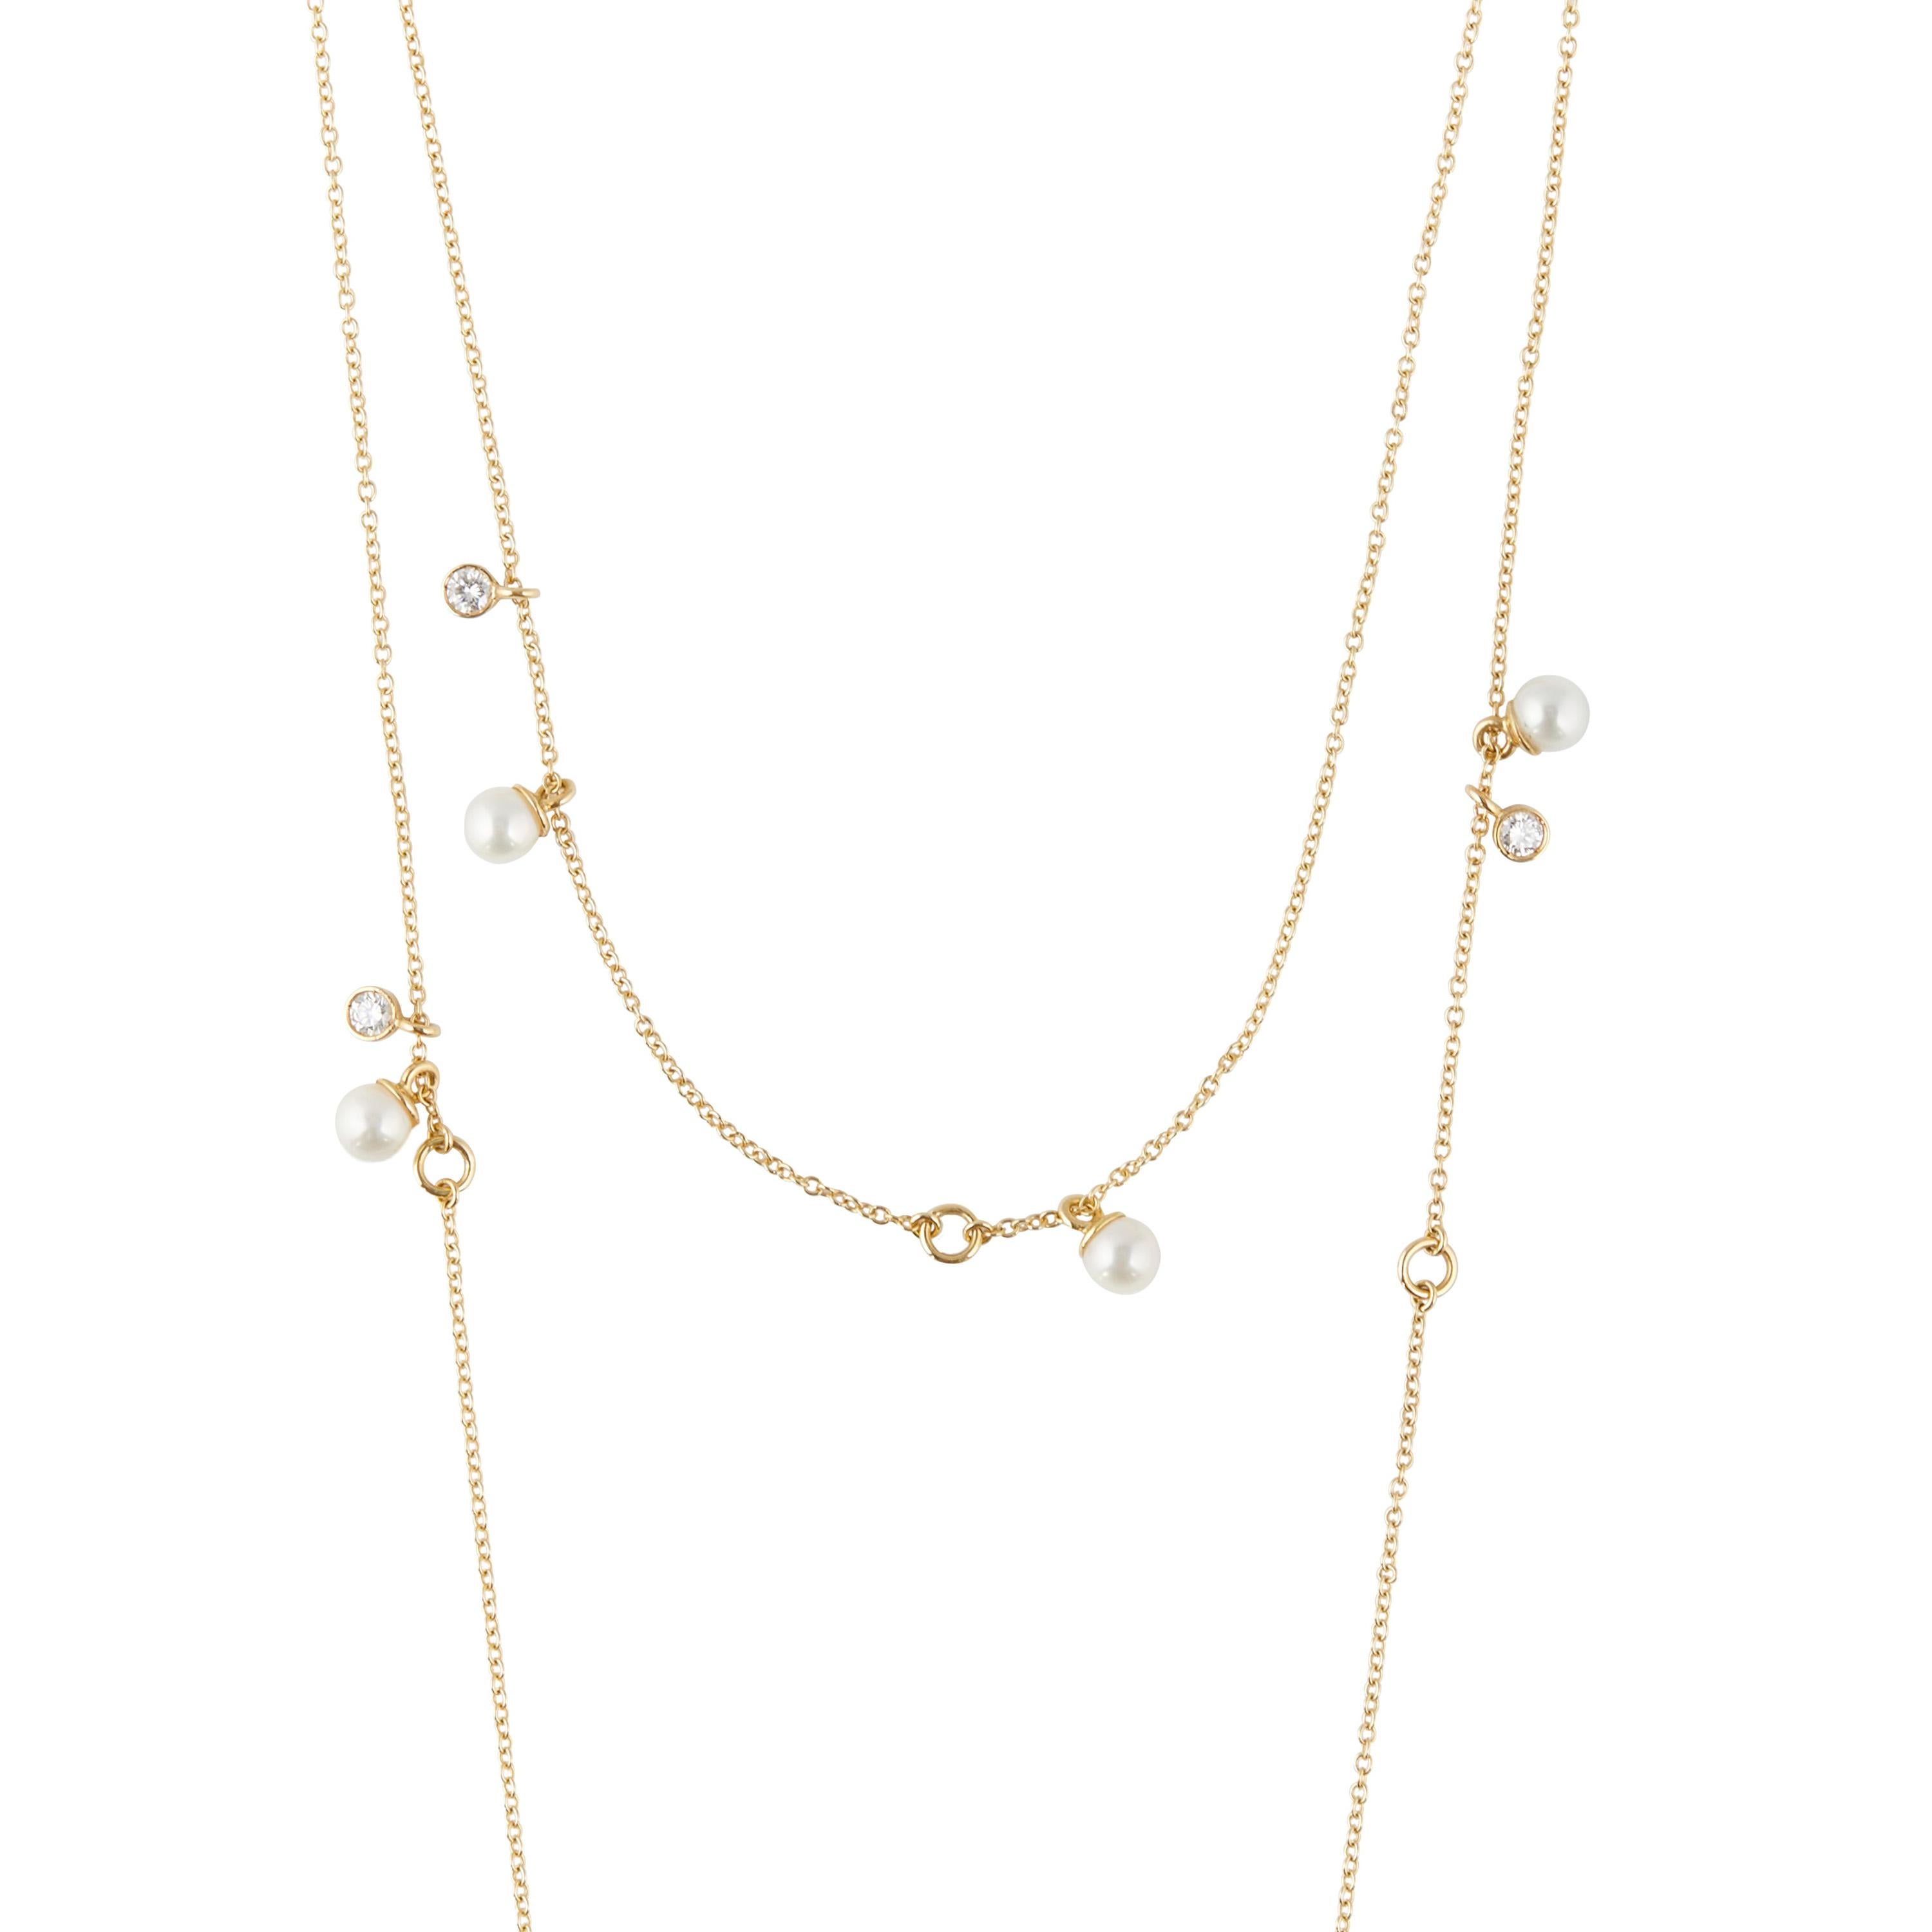 0.30 Carat Diamond Pearl 18kt Yellow Gold Long Chain Multi Strand Necklace  For Sale 2